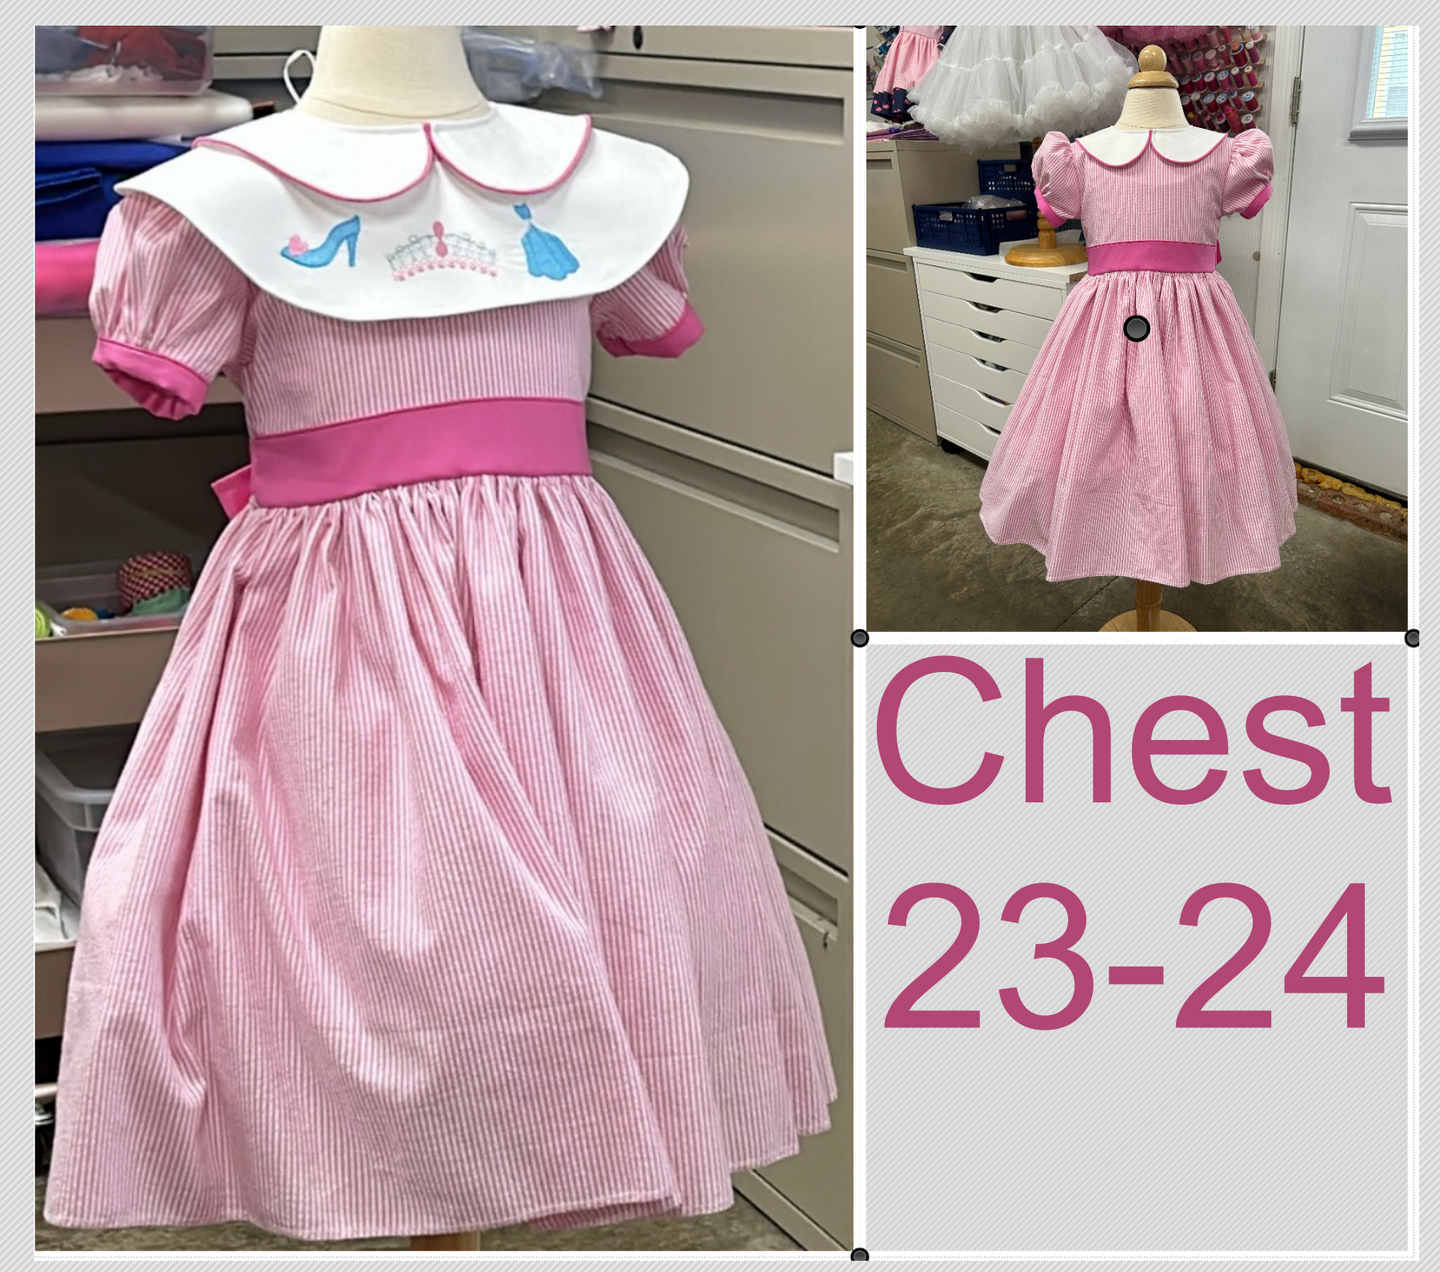 Cinderella Embroidery  Casual Wear, personality dress, interview dress  RTS see measurements below